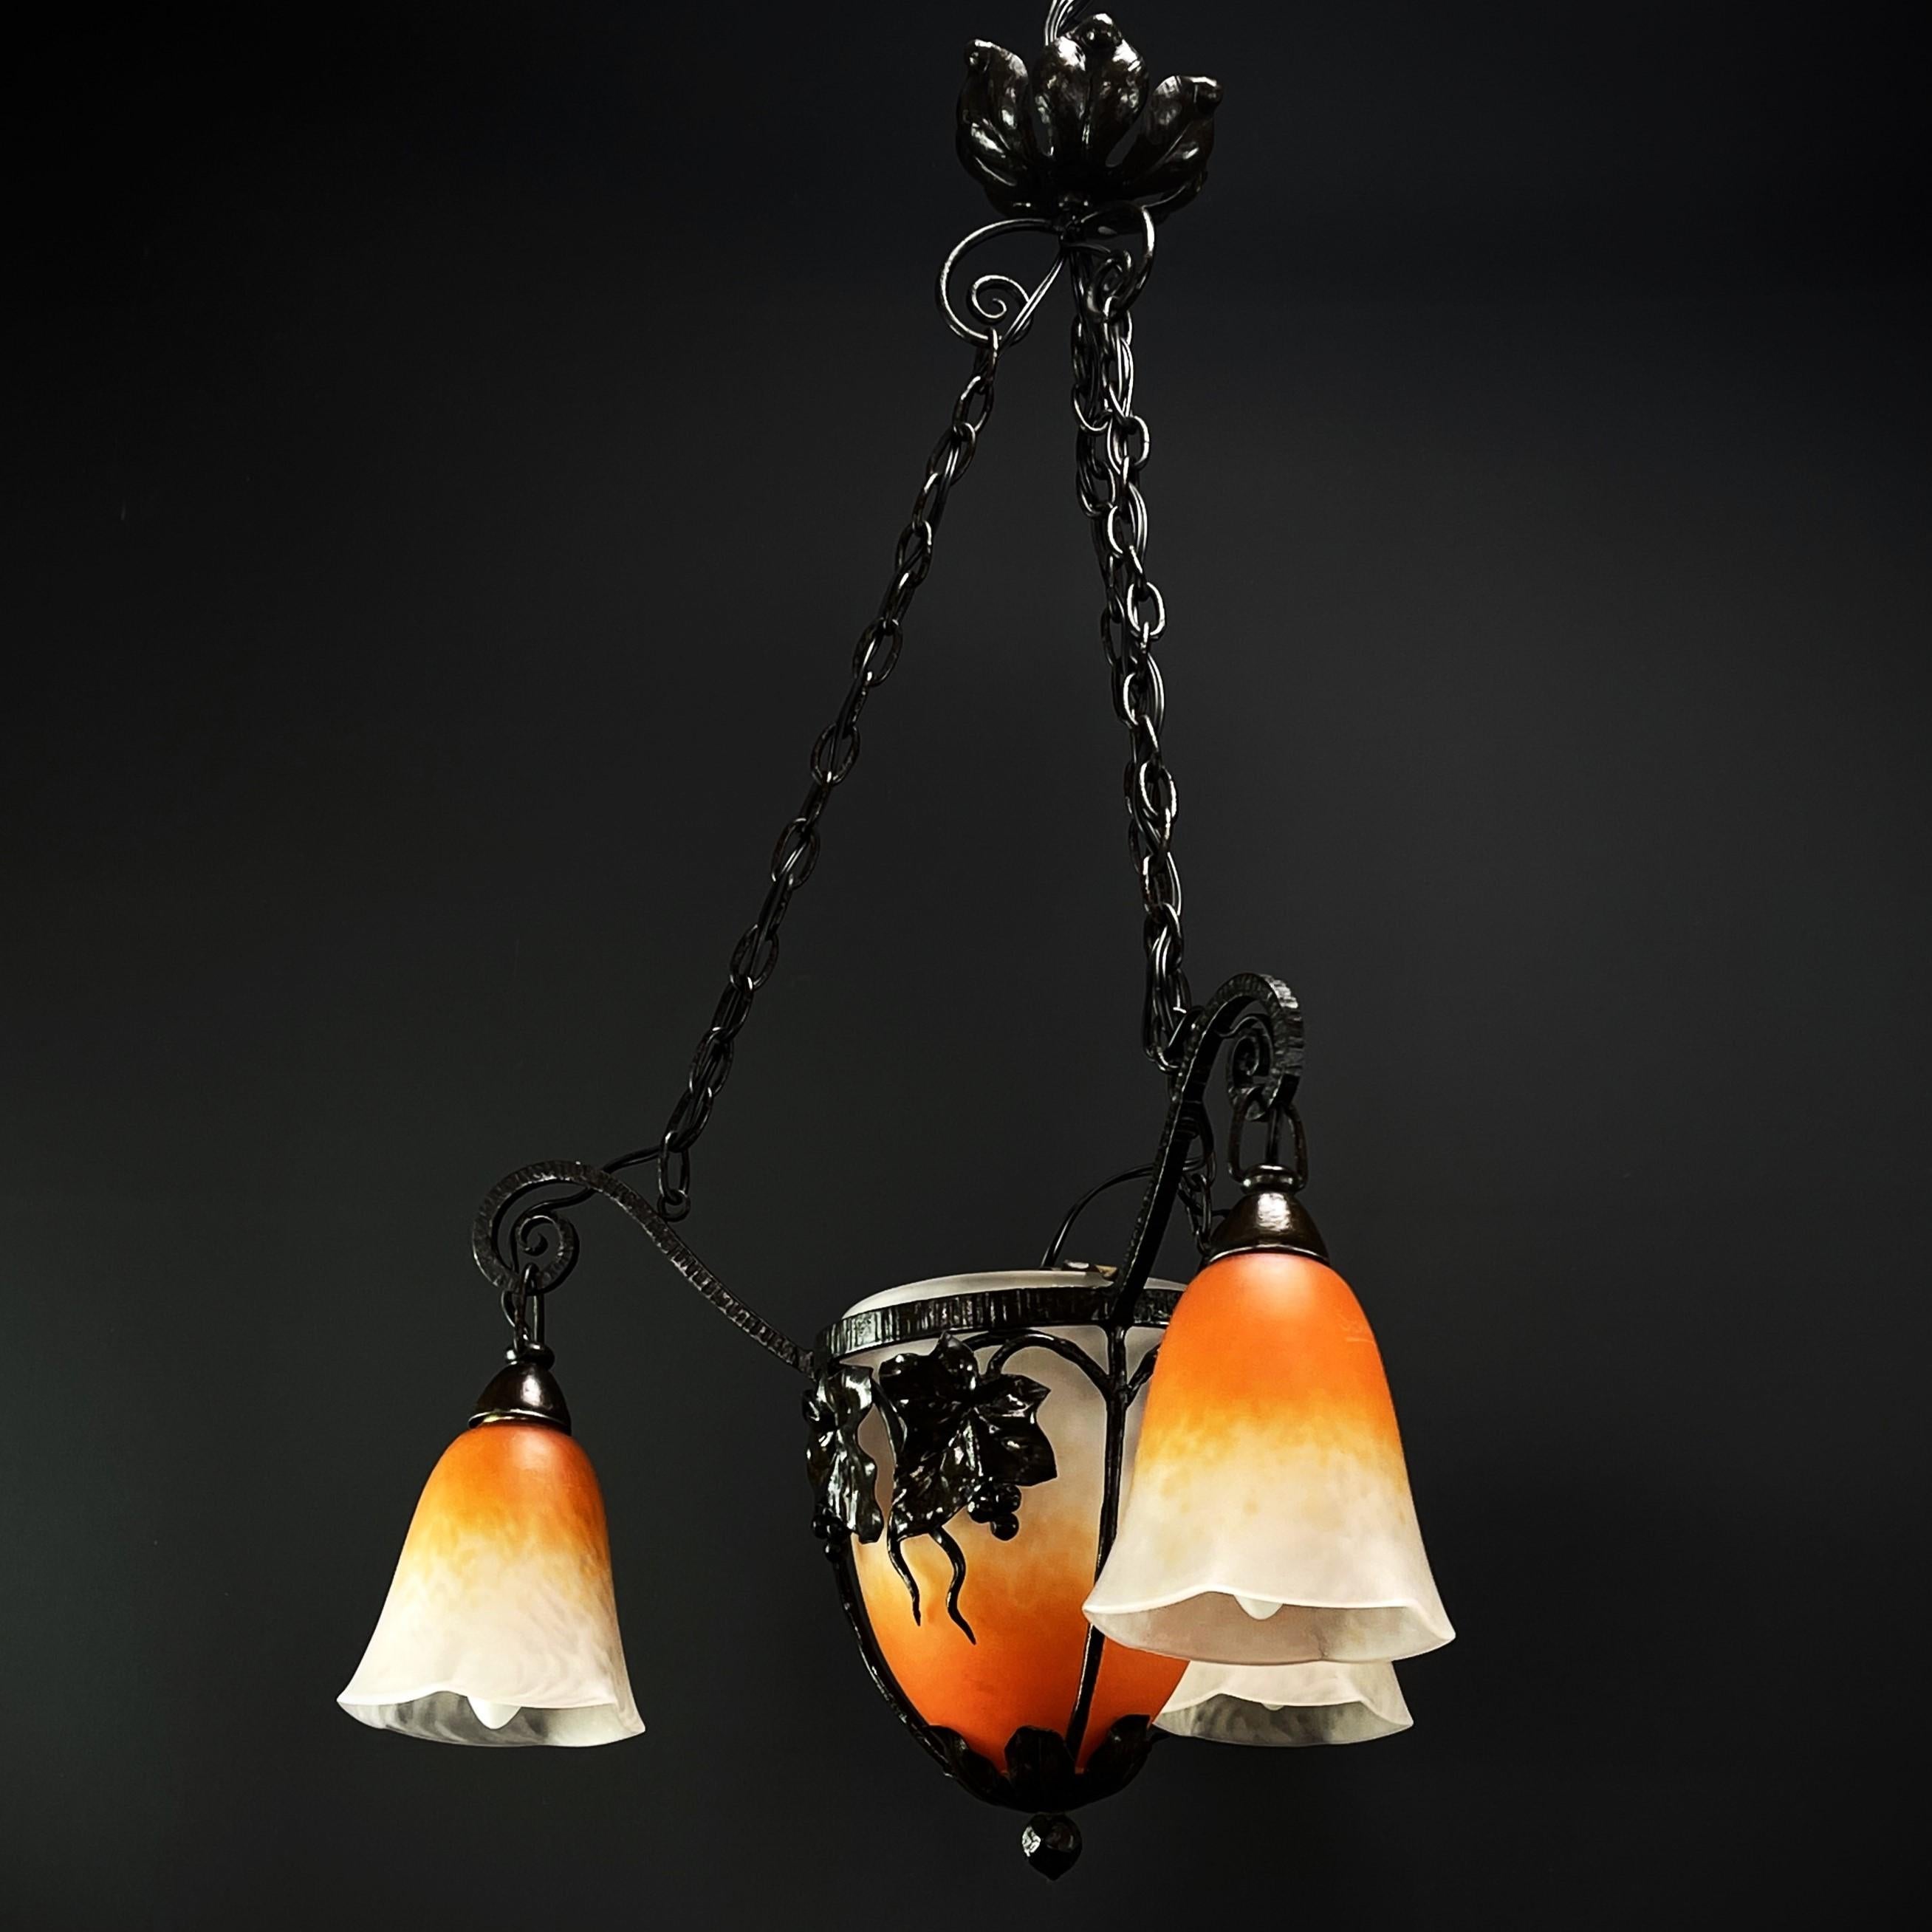 Art Deco chandelier by Schneider - 1930s

The ART DECO ceiling lamp is a remarkable example of early 20th century craftsmanship and style. 

The signature 